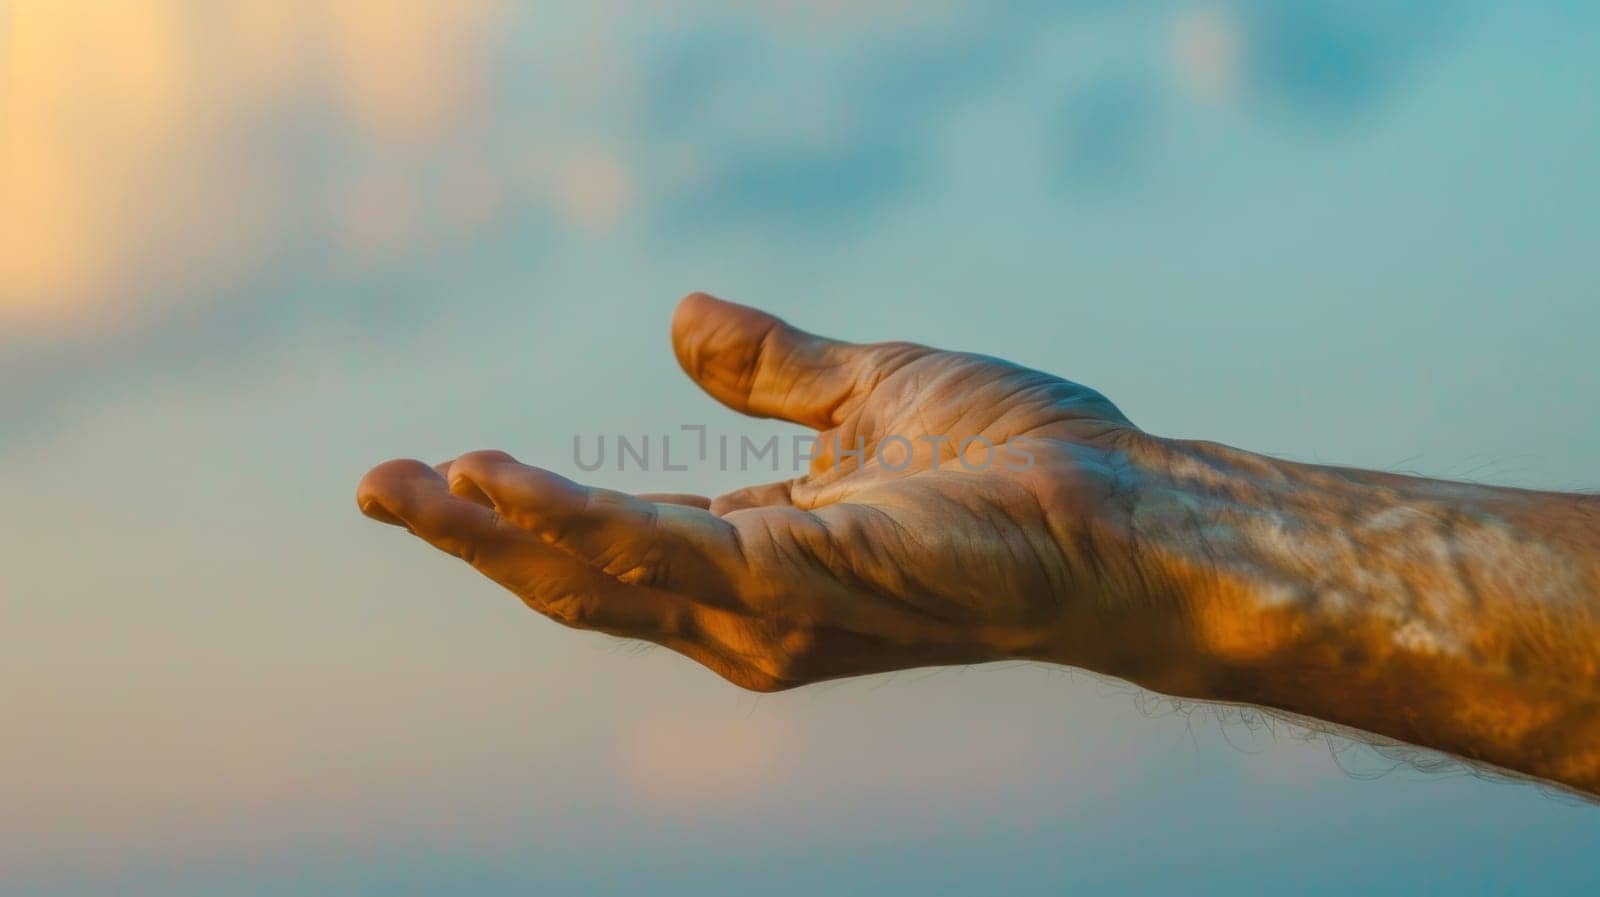 A man reaching out to the sky with his hand